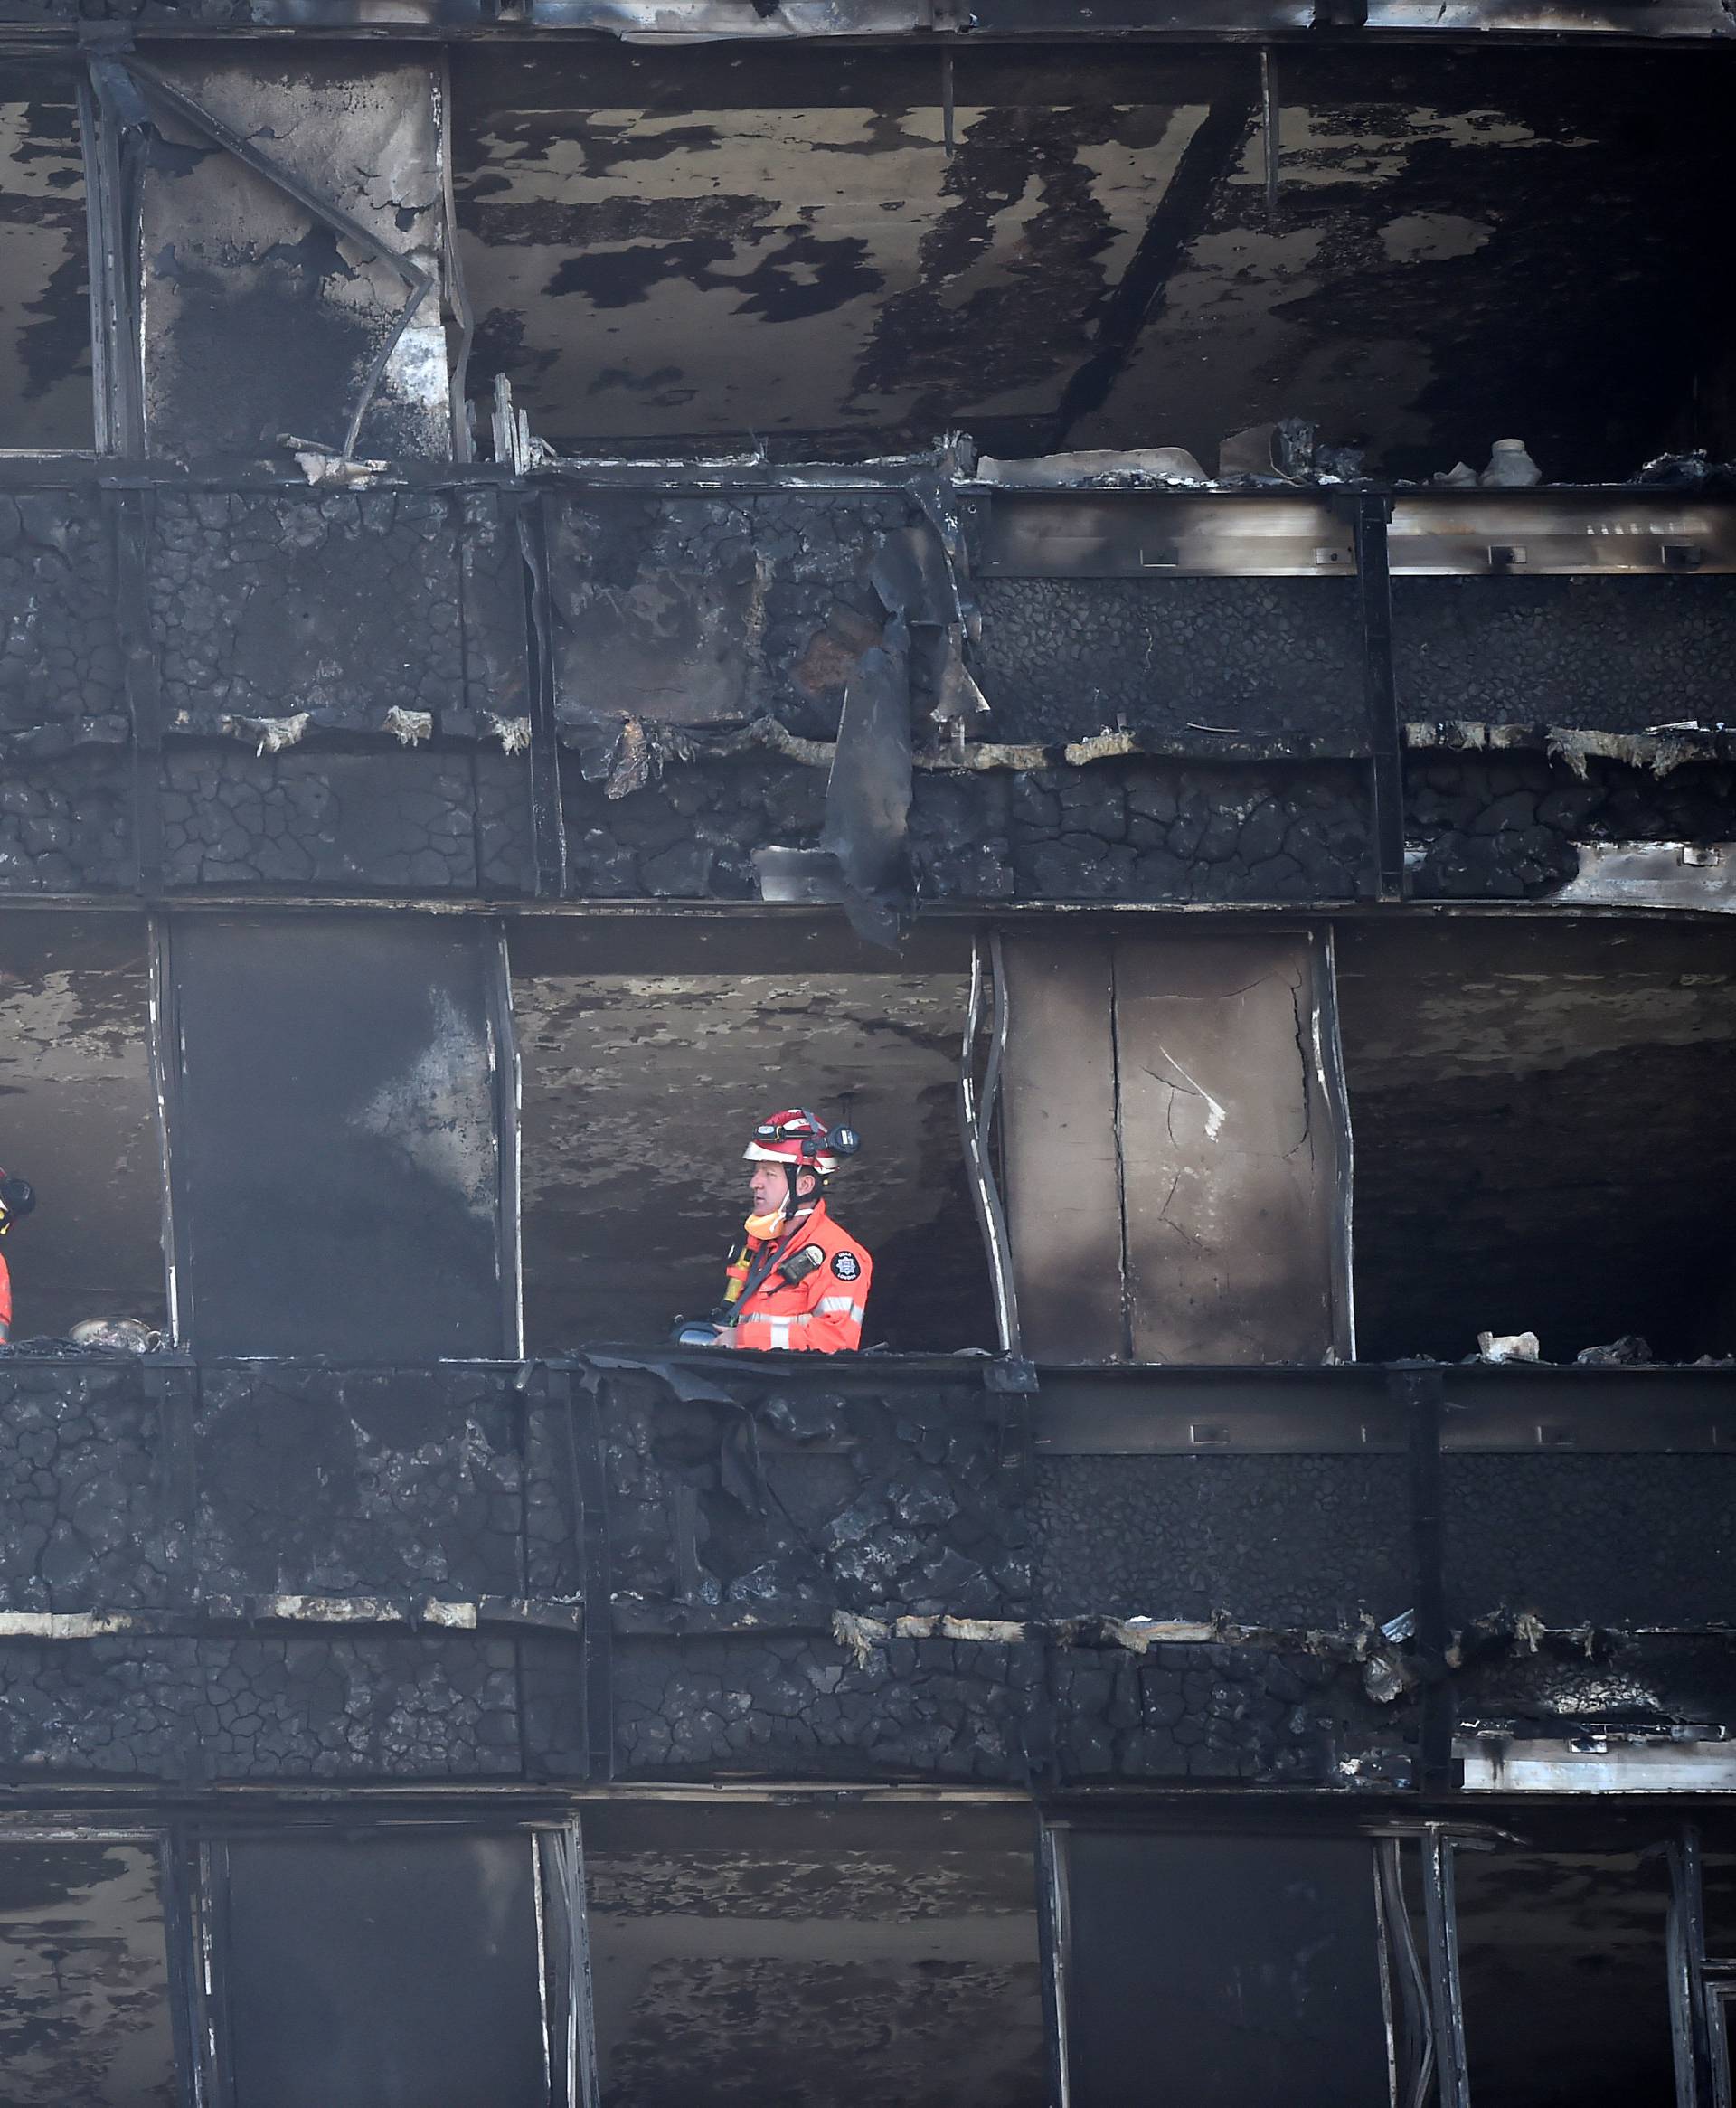 Members of the emergency services work inside the charred remains of the Grenfell apartment tower block in North Kensington